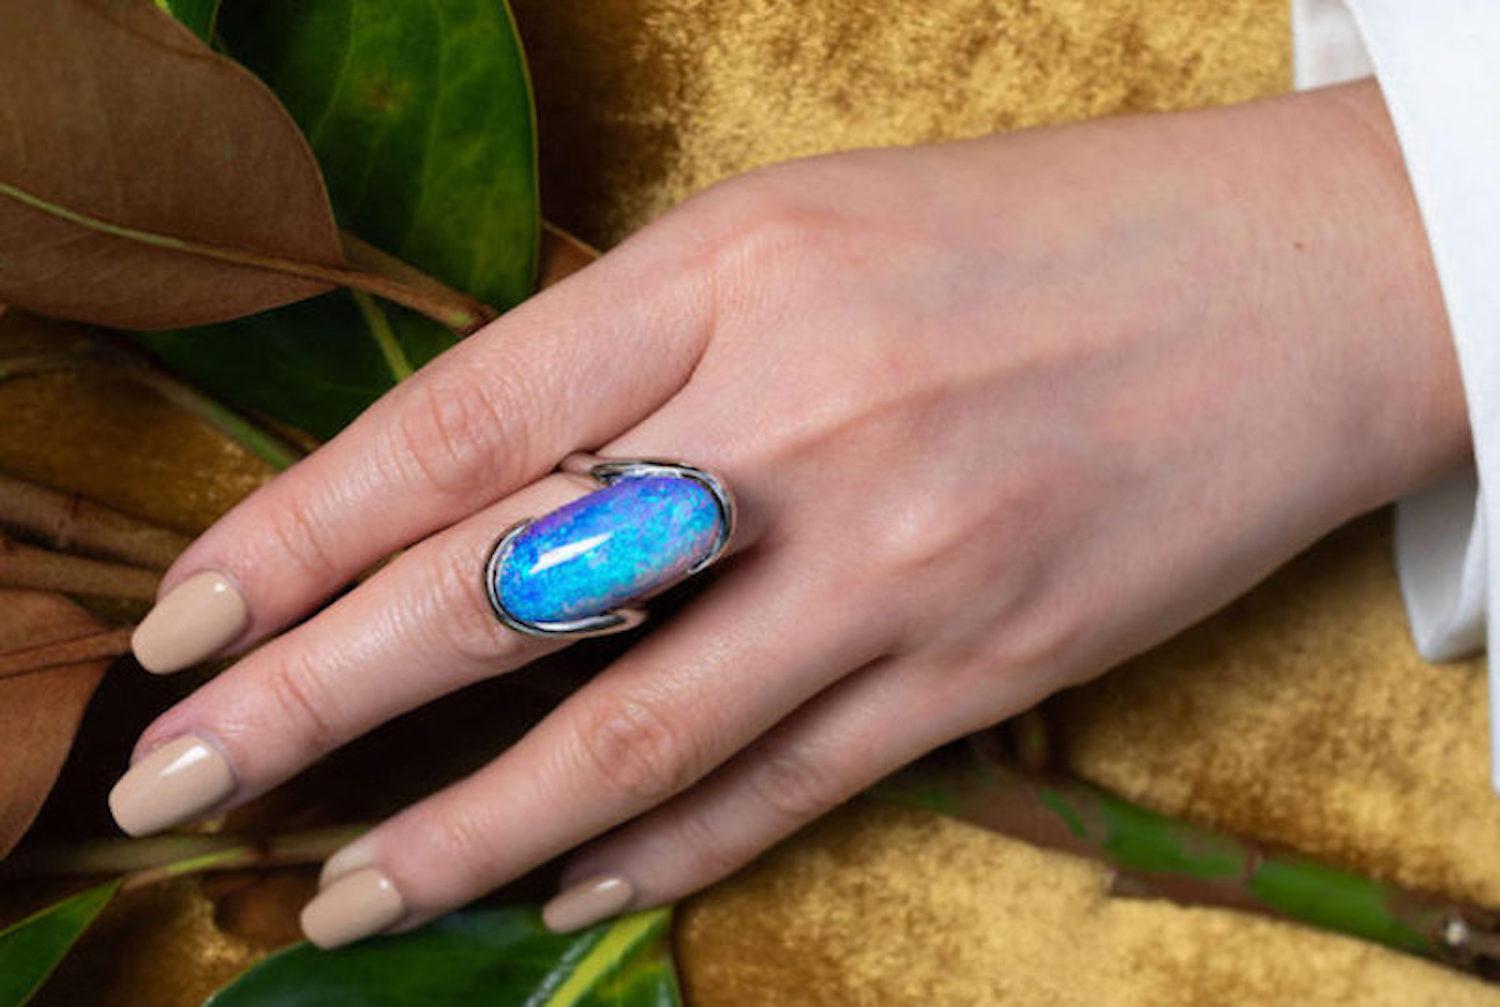 “Audrey’s Sky” opal ring is like the heavens on a perfect summer day. The impossibly blue 19.46ct boulder opal from our own mines in Jundah-Opalville is set in an ultra-contemporary 18K gold setting that makes this gem impossible to ignore. A